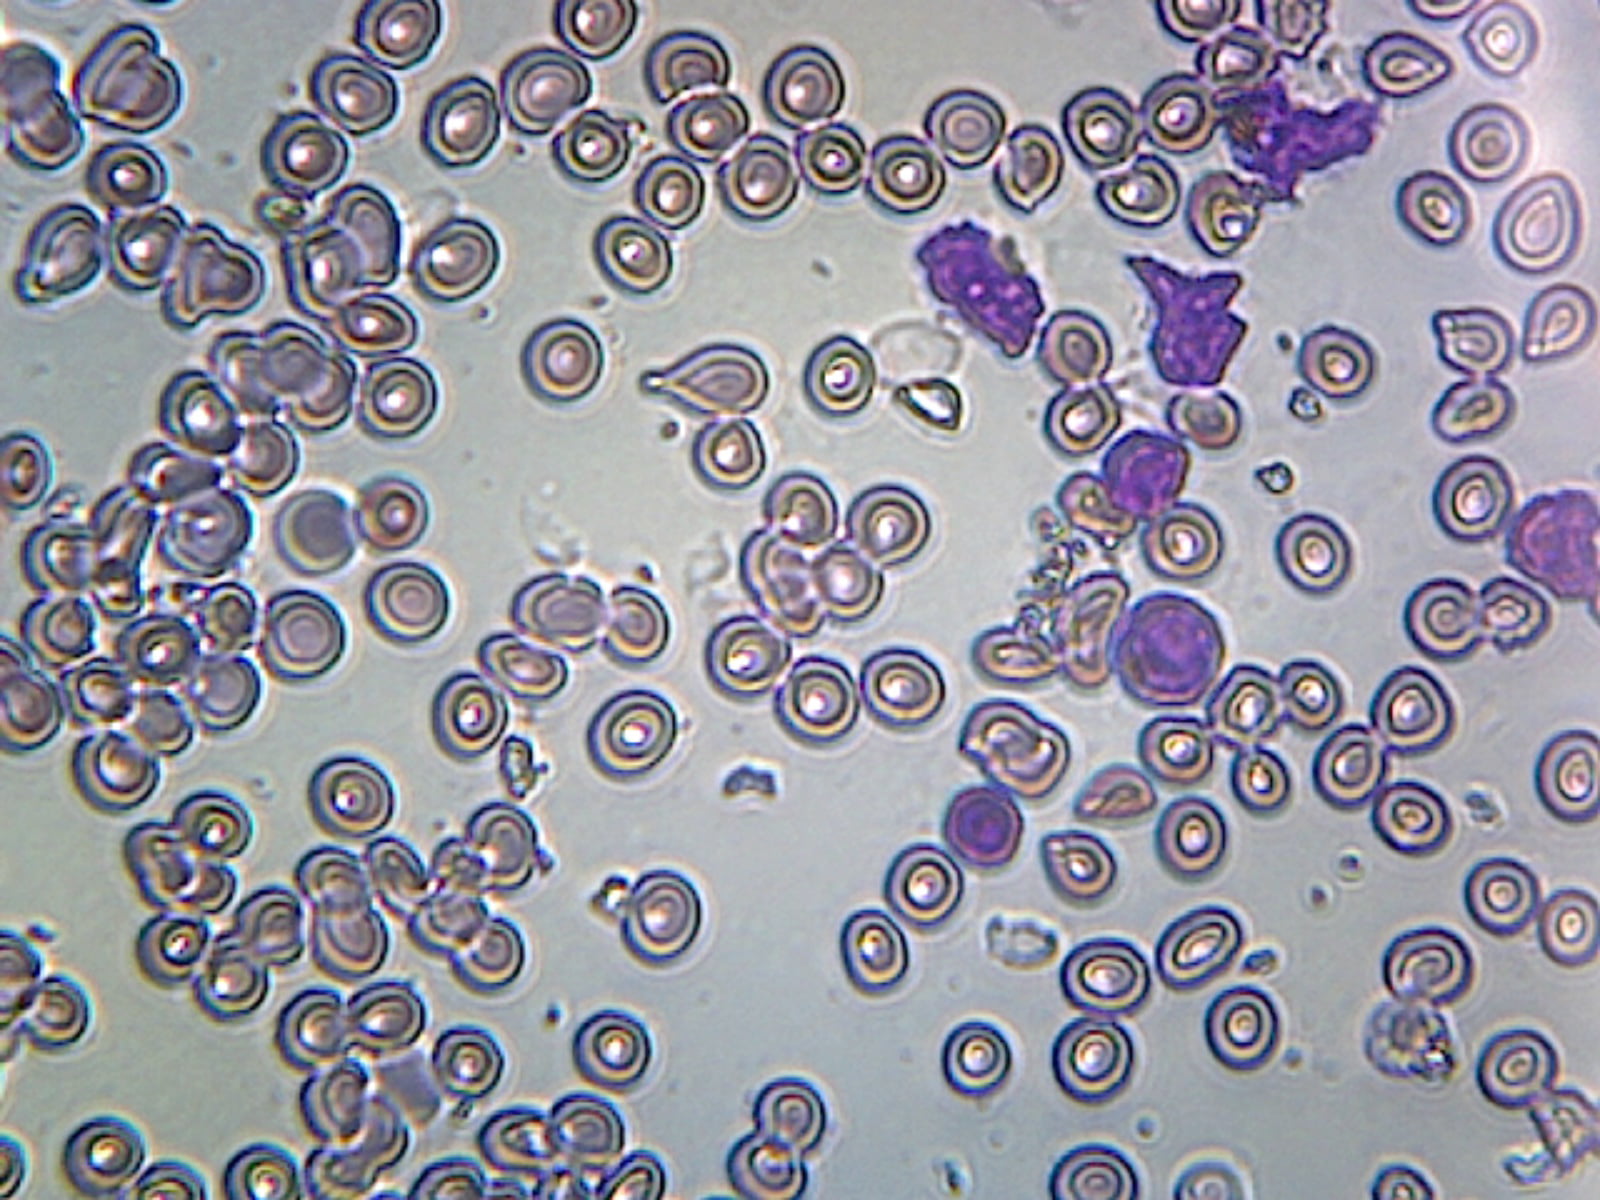 Acute Lymphatic Leukemia Smear From Blood Gs Stain Showing